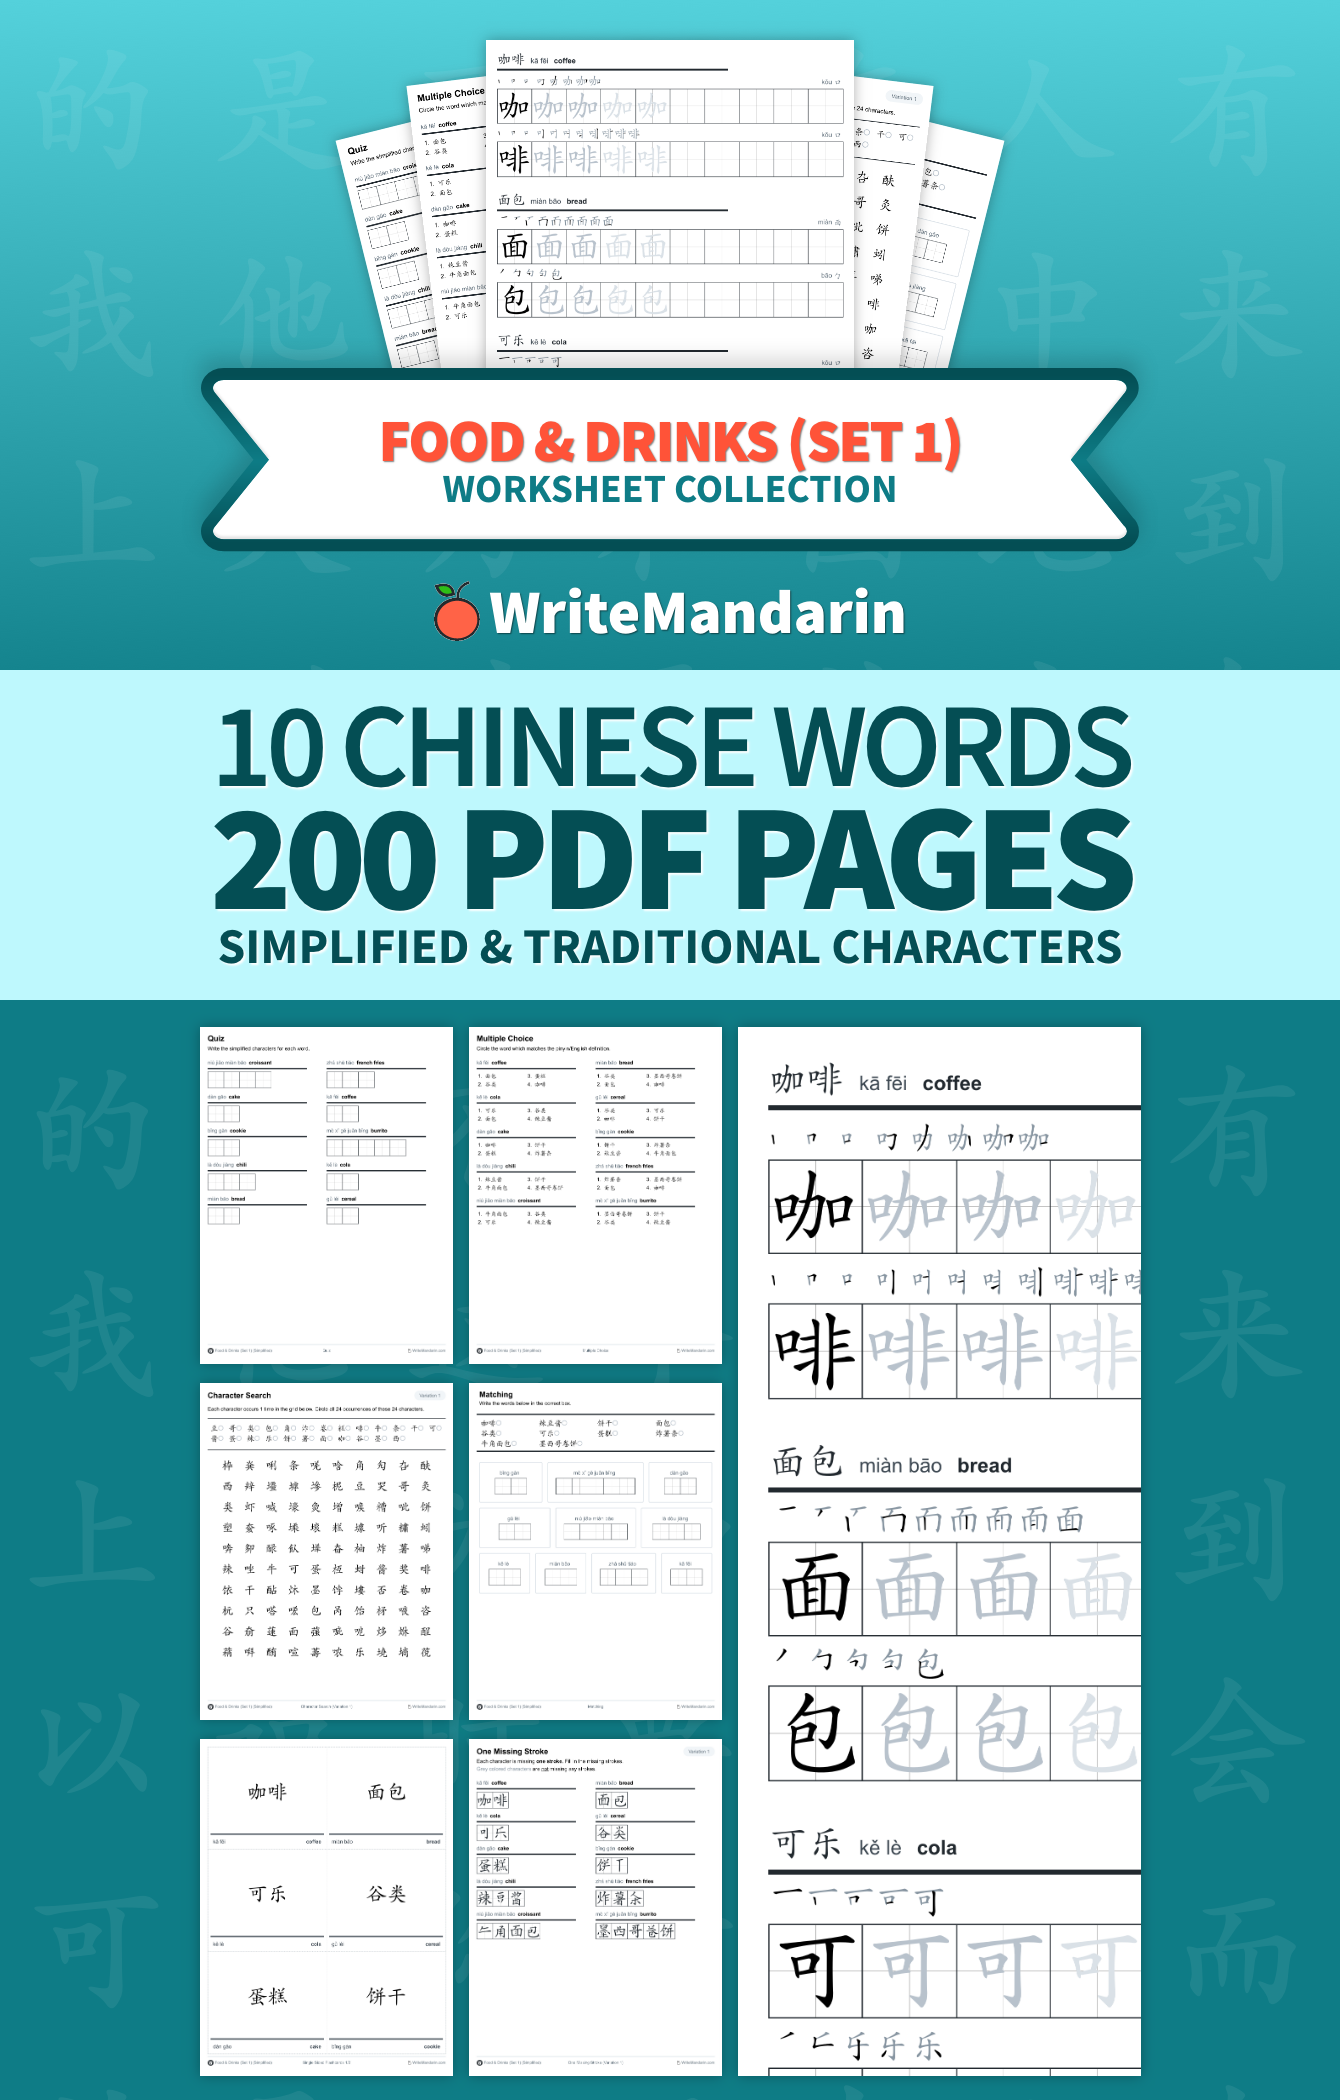 Preview image of Food & Drinks (Set 1) worksheet collection